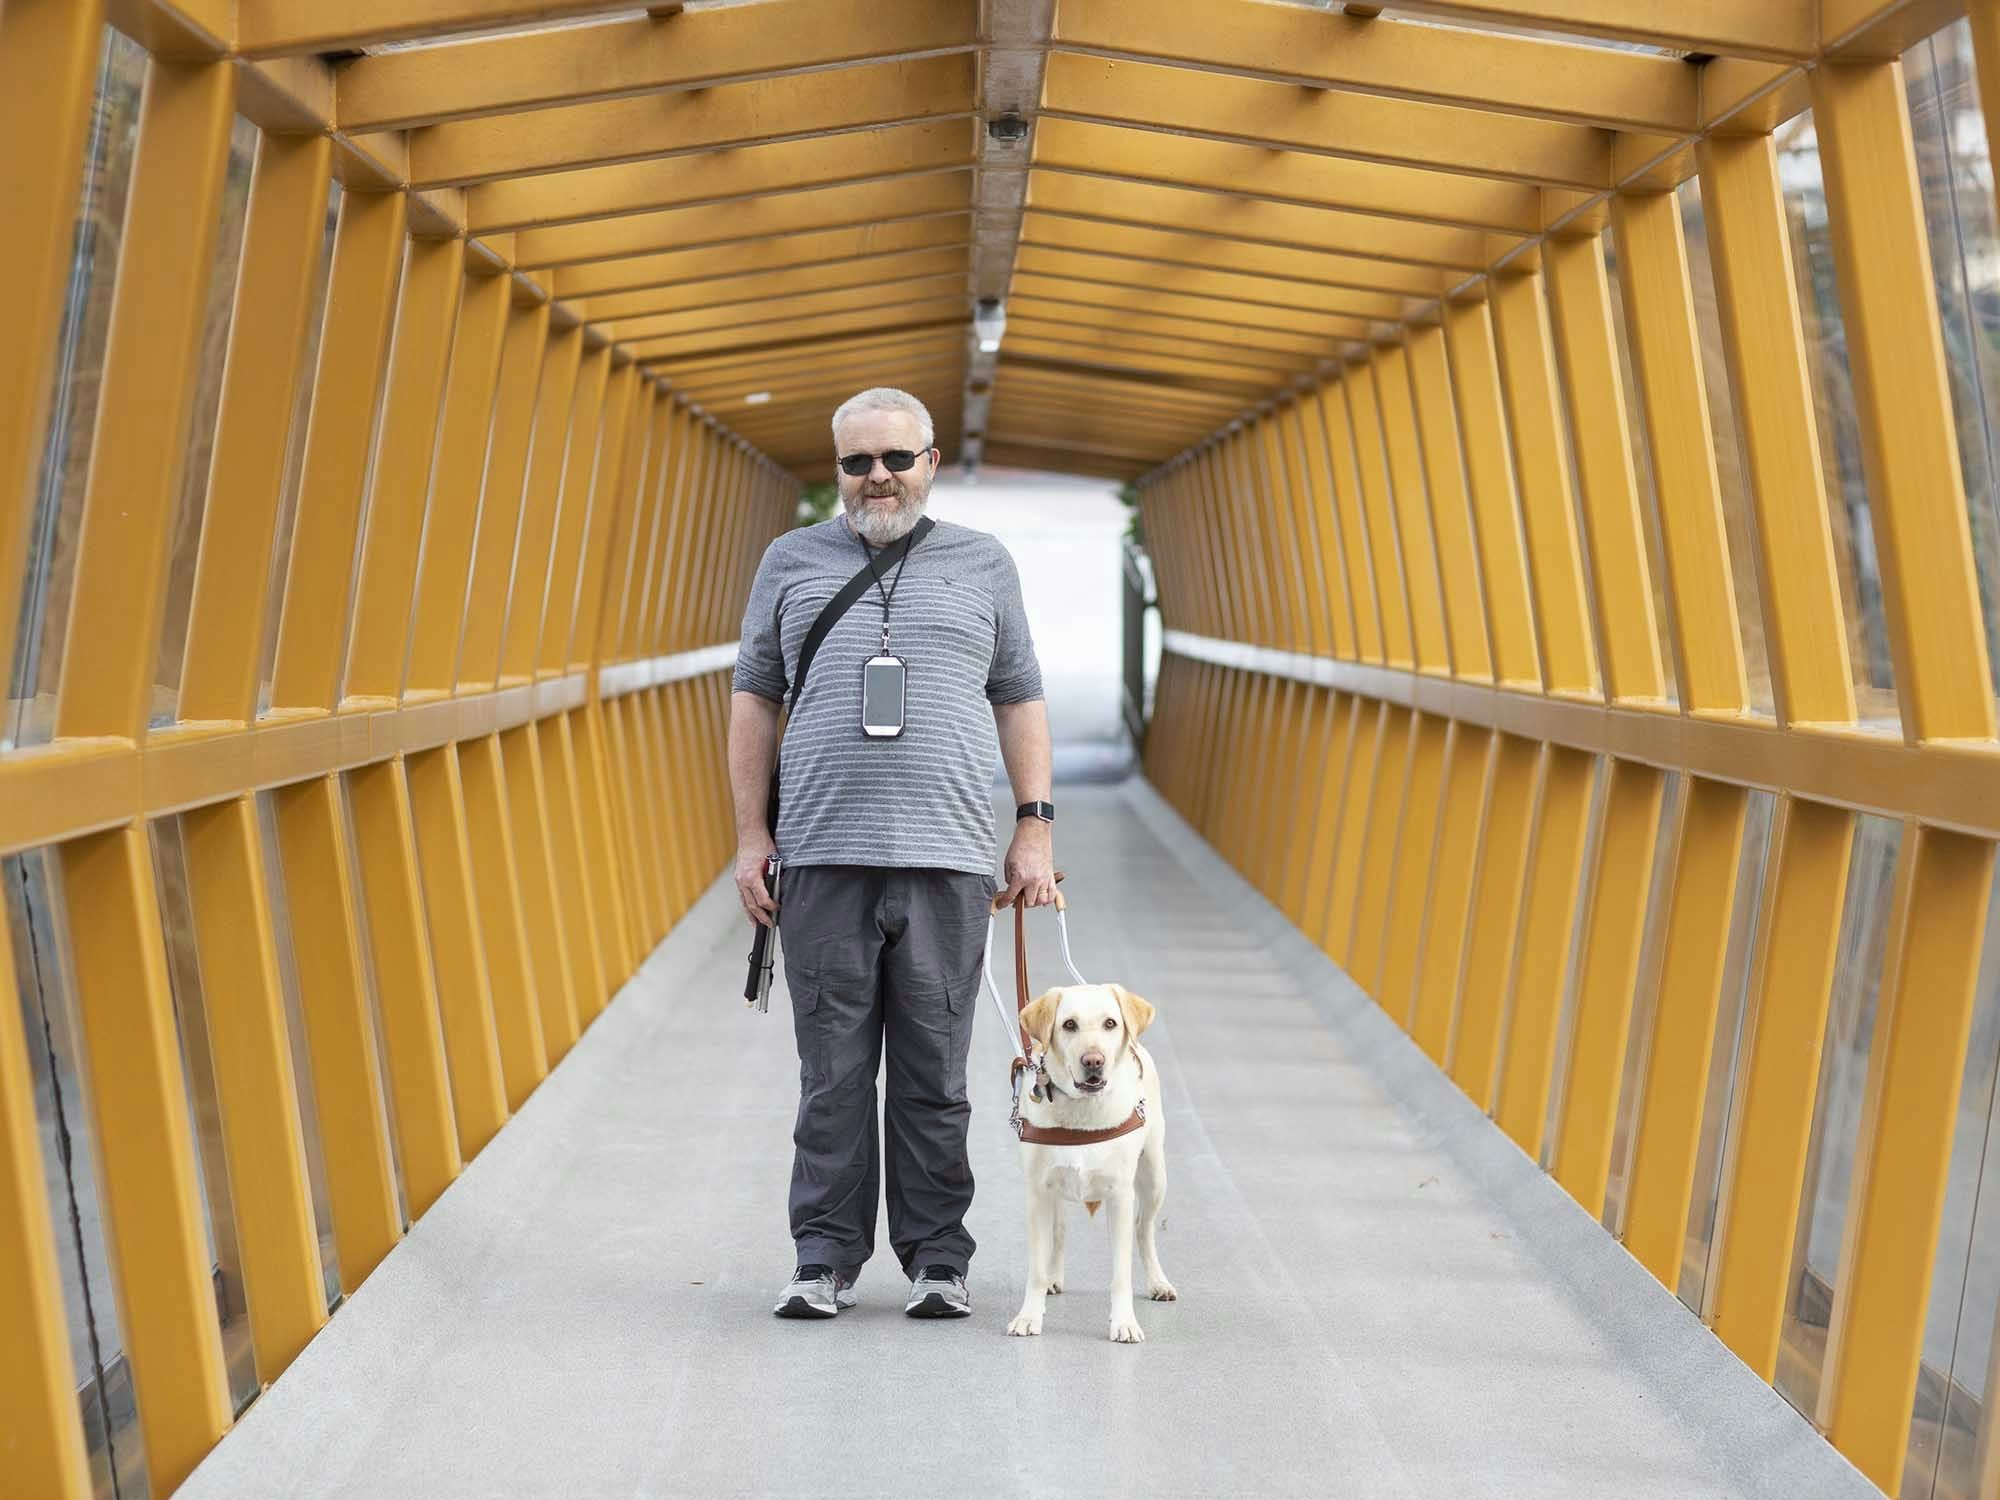 Vision Australia’s Access Technology Advisor David Woodbridge has been using Soundscape with his assistance dog [Source: Vision Australia]
